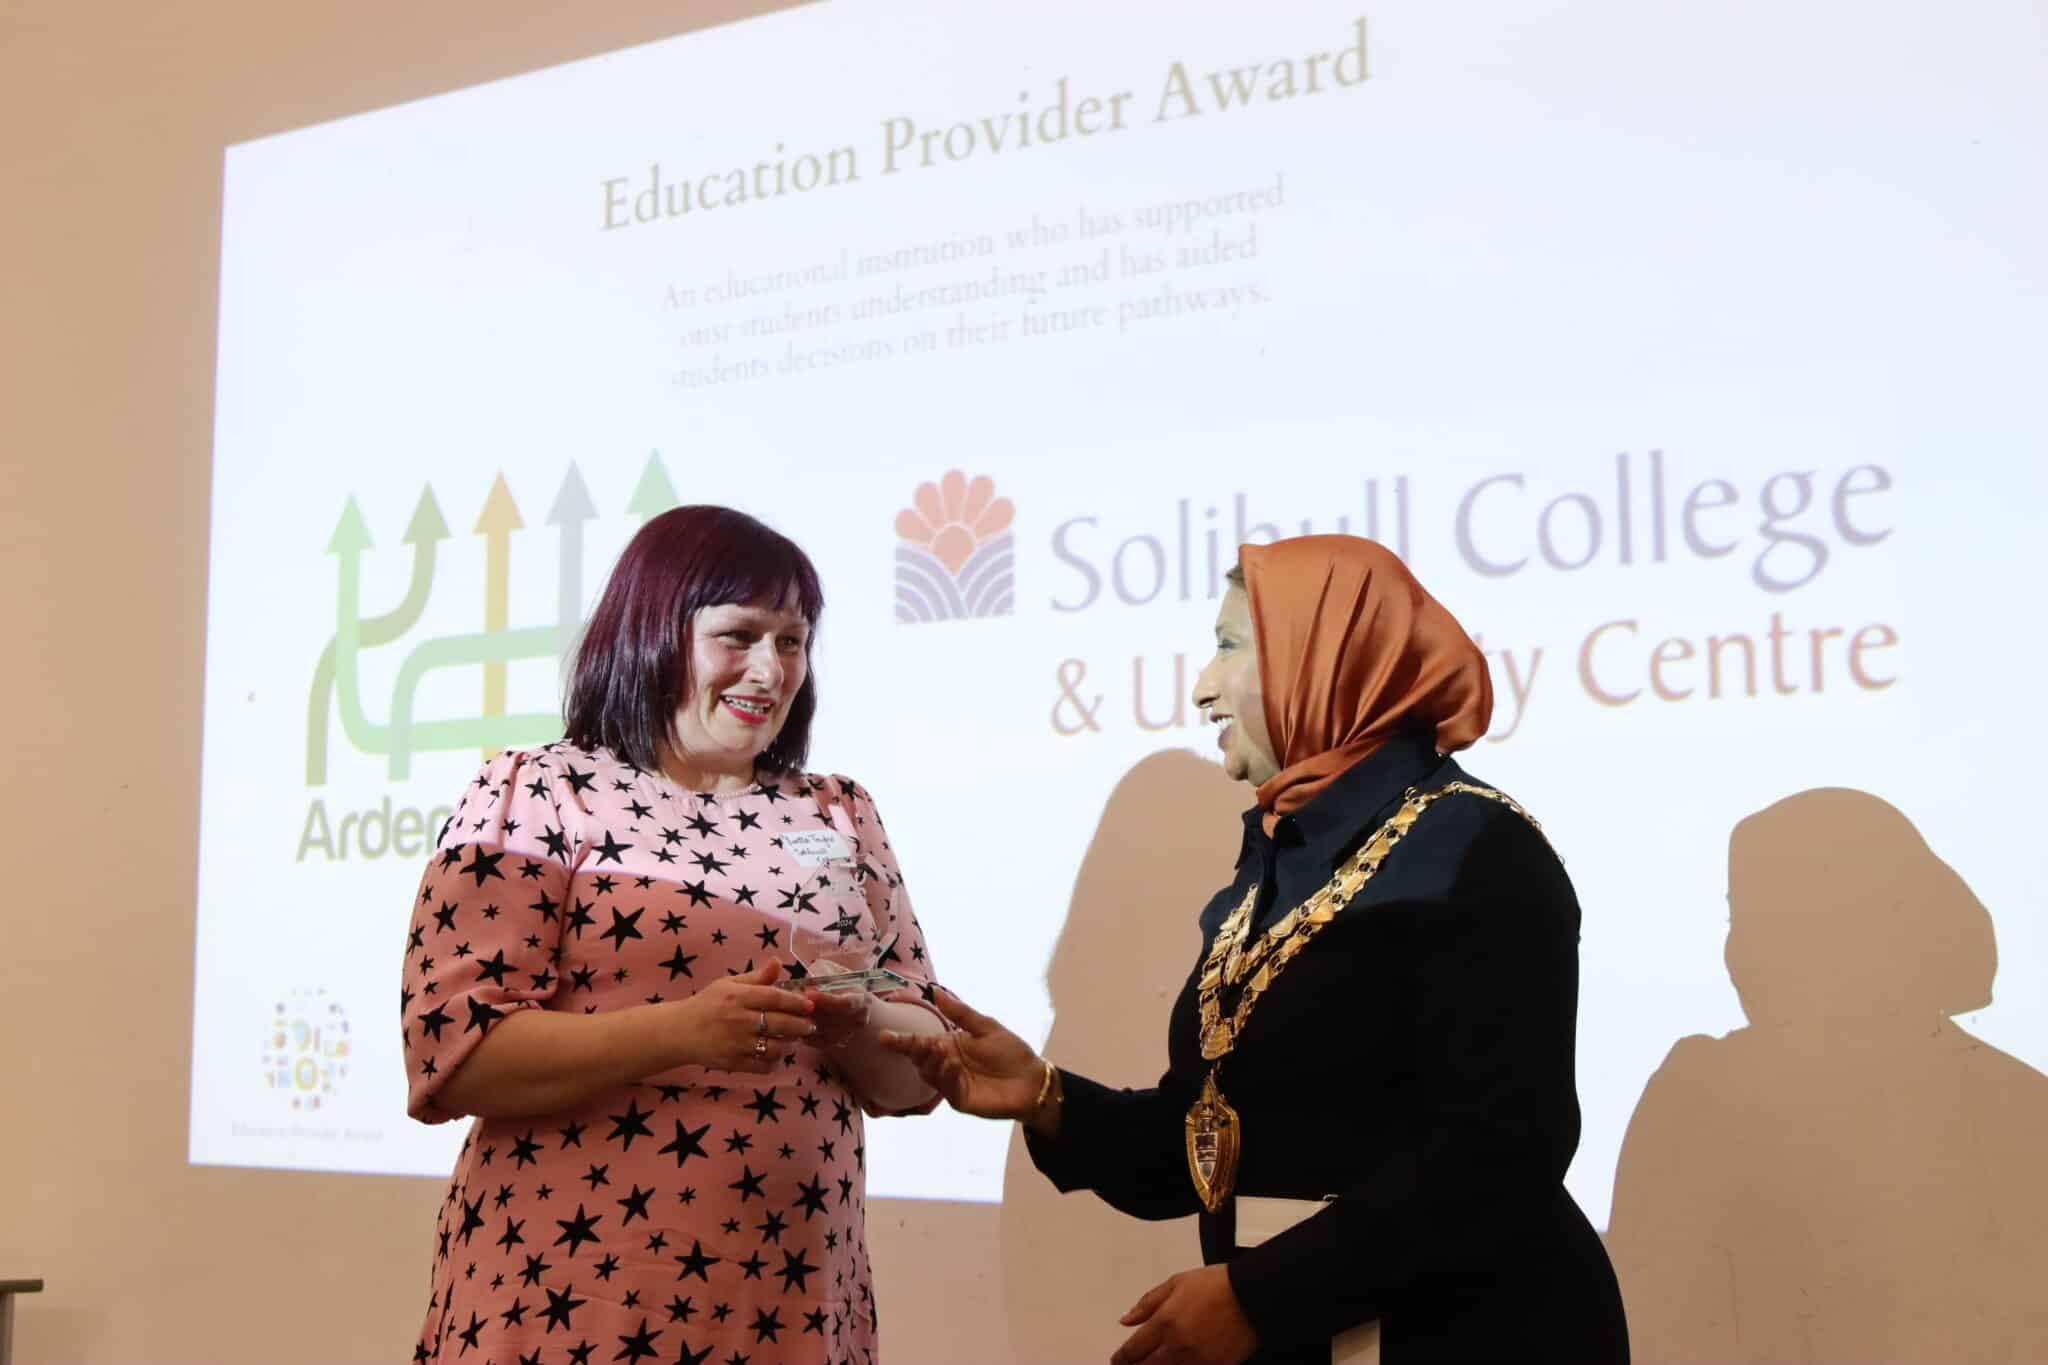 Yvette receives award from the Mayor of Solihull